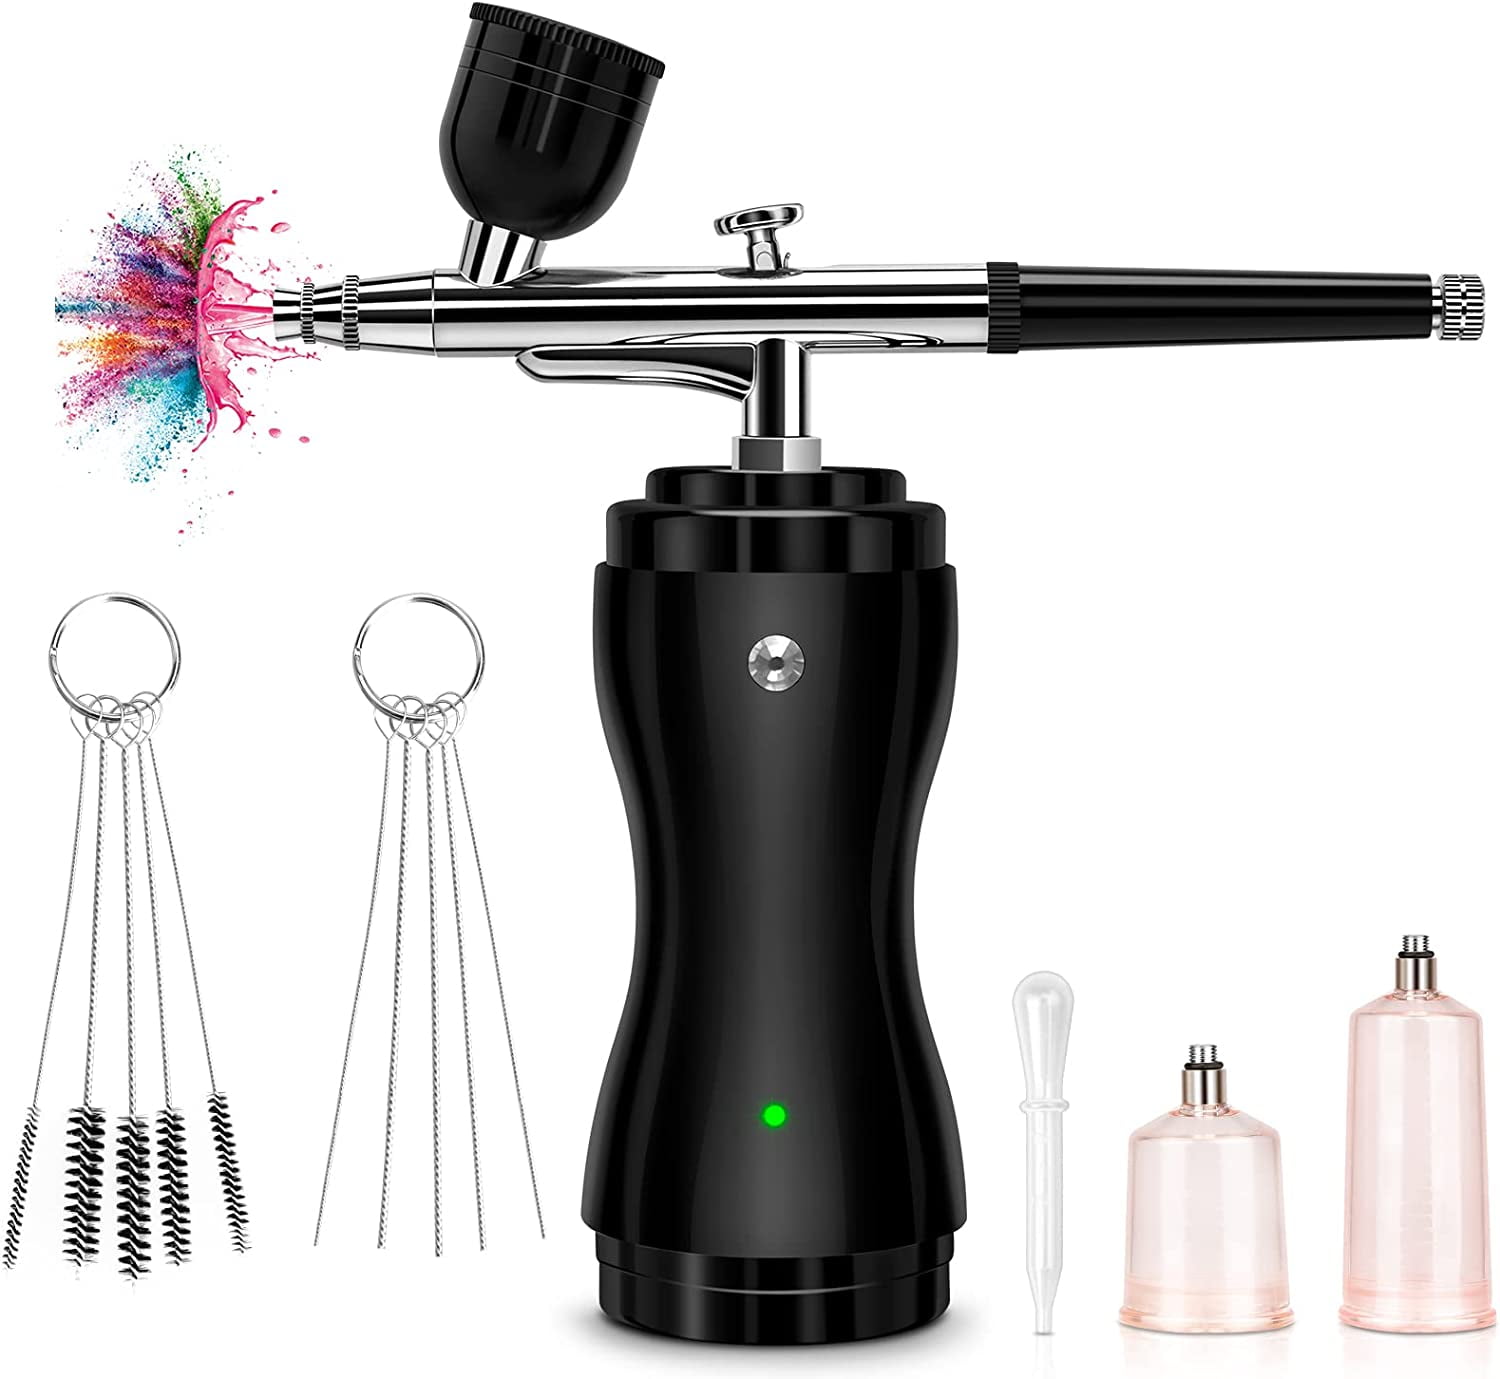 OPHIR Airbrushing Air Brush Systems Airbrush Compressor with Tank 0.3 0.5  0.8mm Nozzle Sprayer for Tanning Temporary Tattoo, Wish